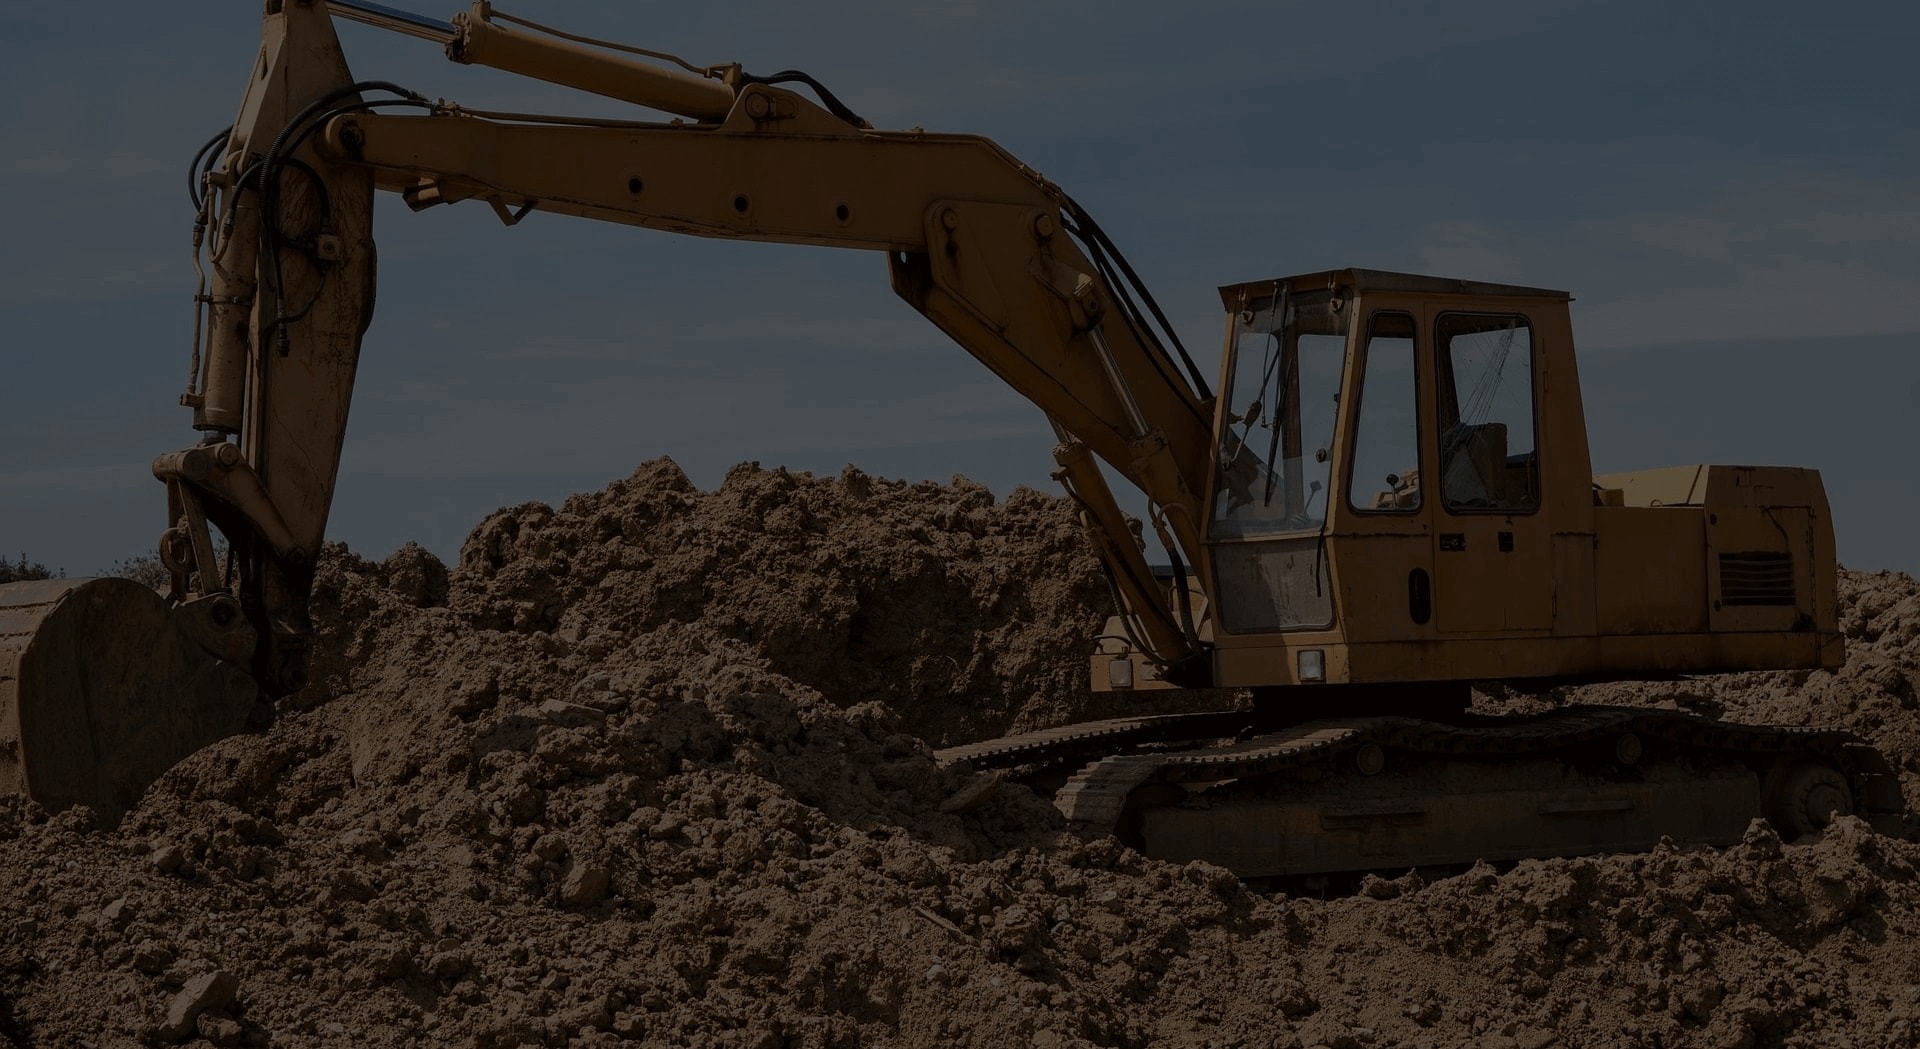 Image of a Construction Vehicle Moving Dirt